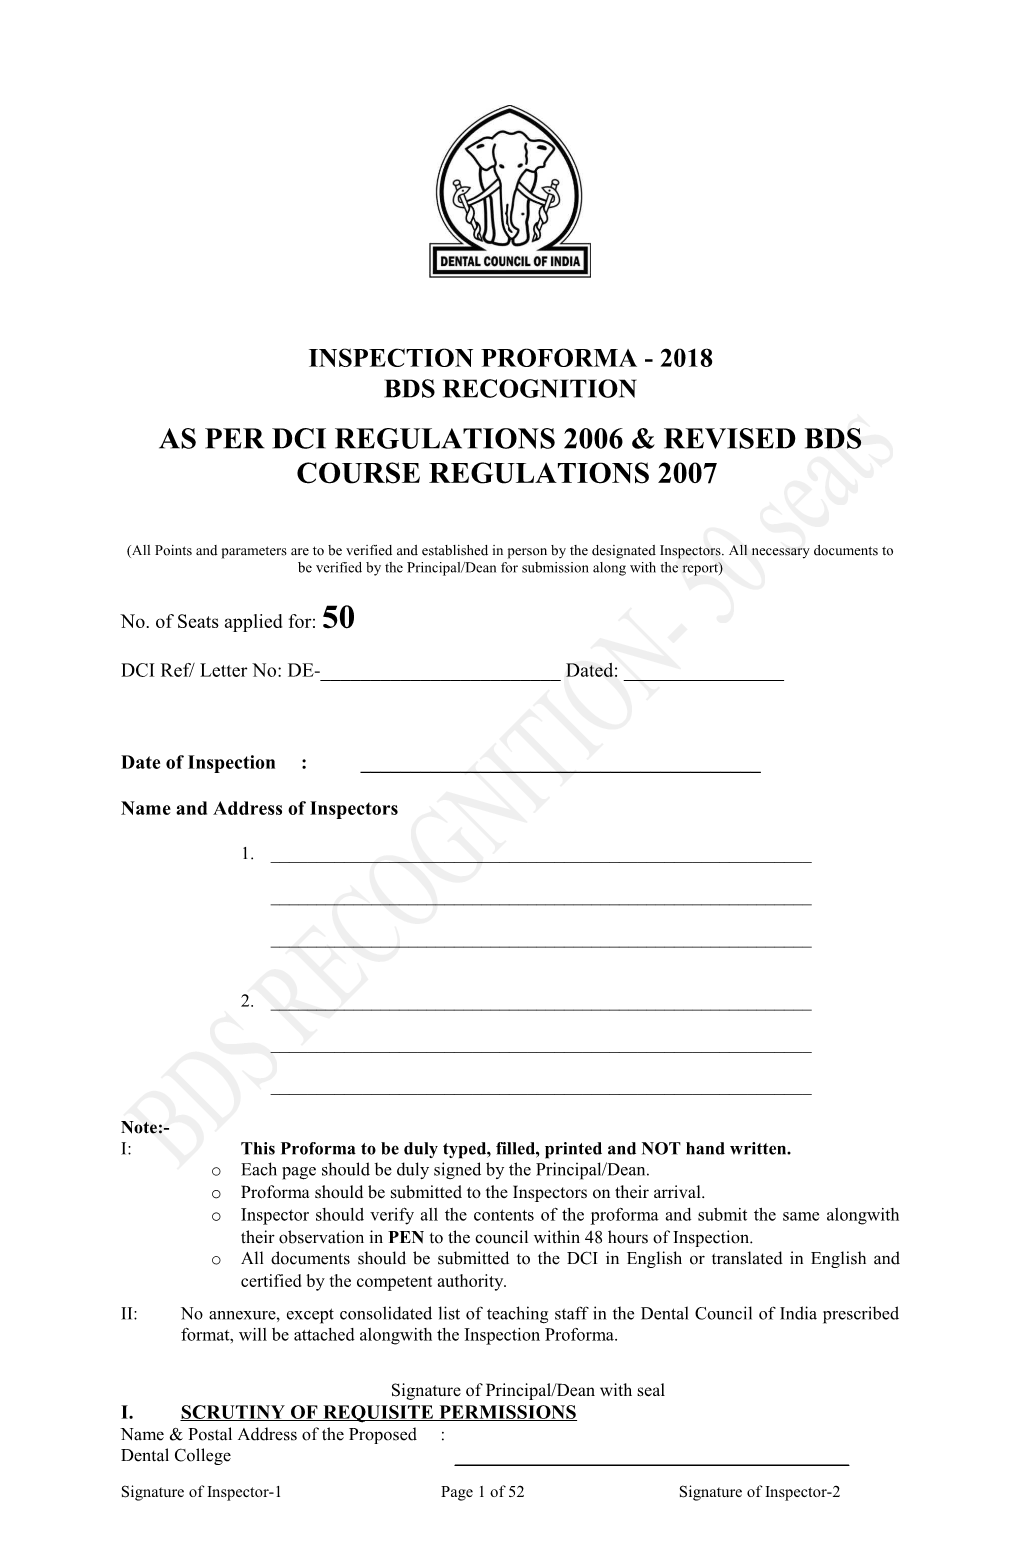 As Per Dci Regulations 2006 & Revised Bds Course Regulations 2007